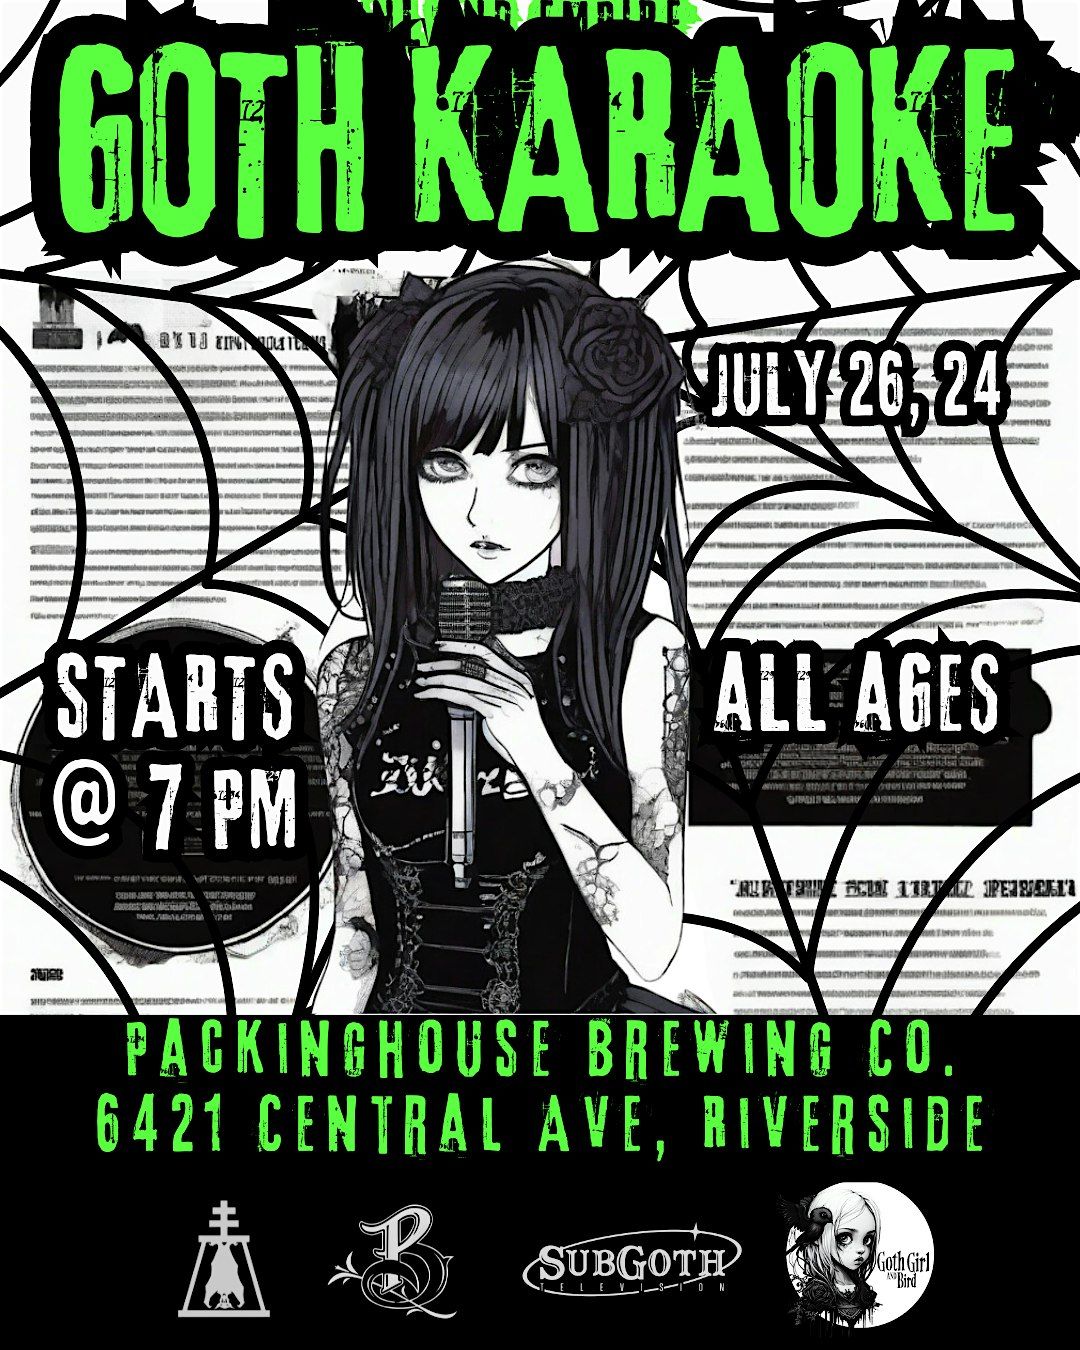 Inland Empire Goth Karaoke at Packinghouse Brewery